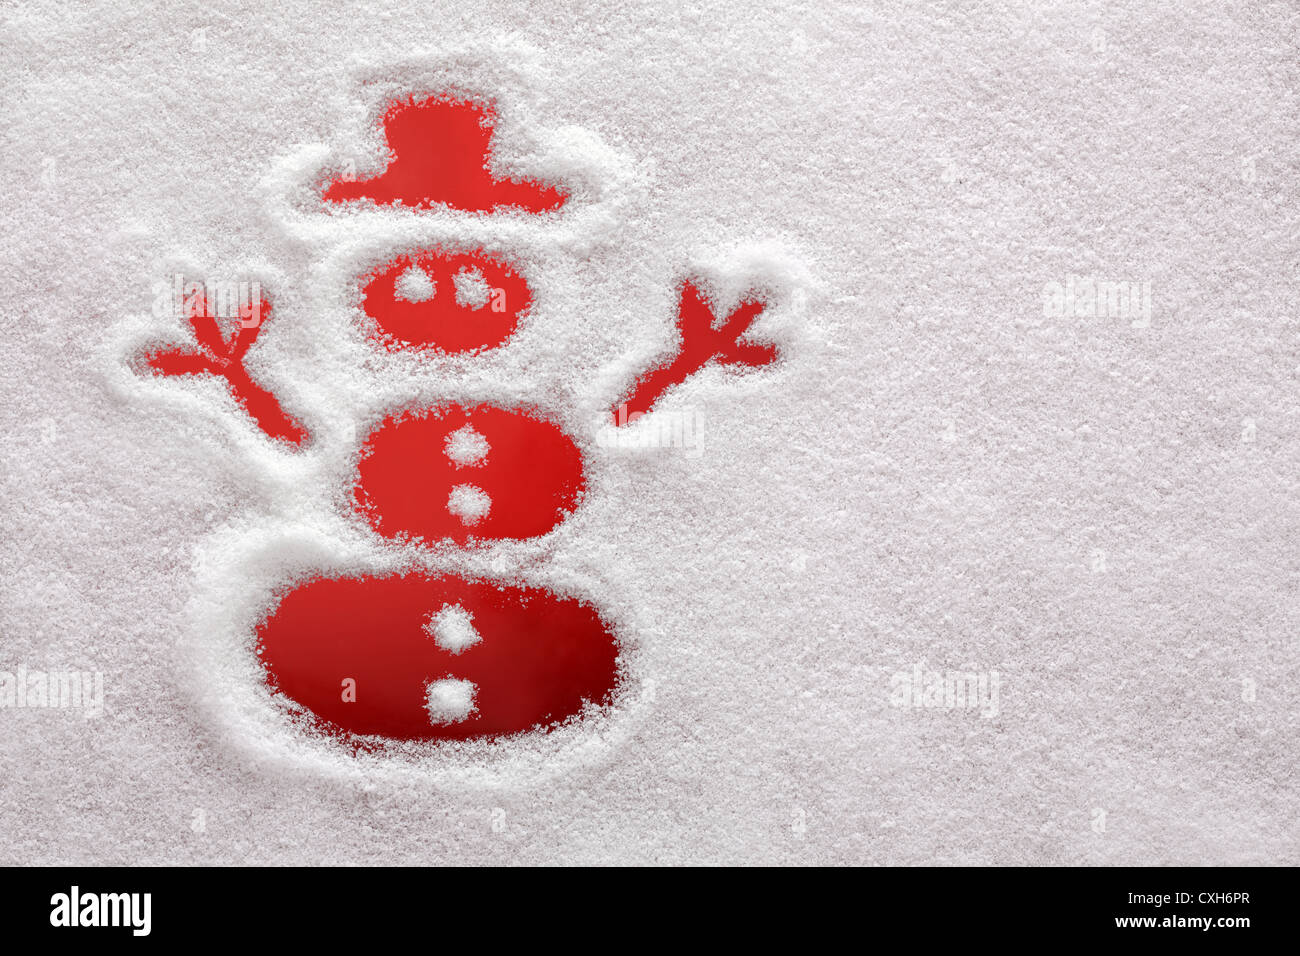 Snowman drawn in the snow Stock Photo